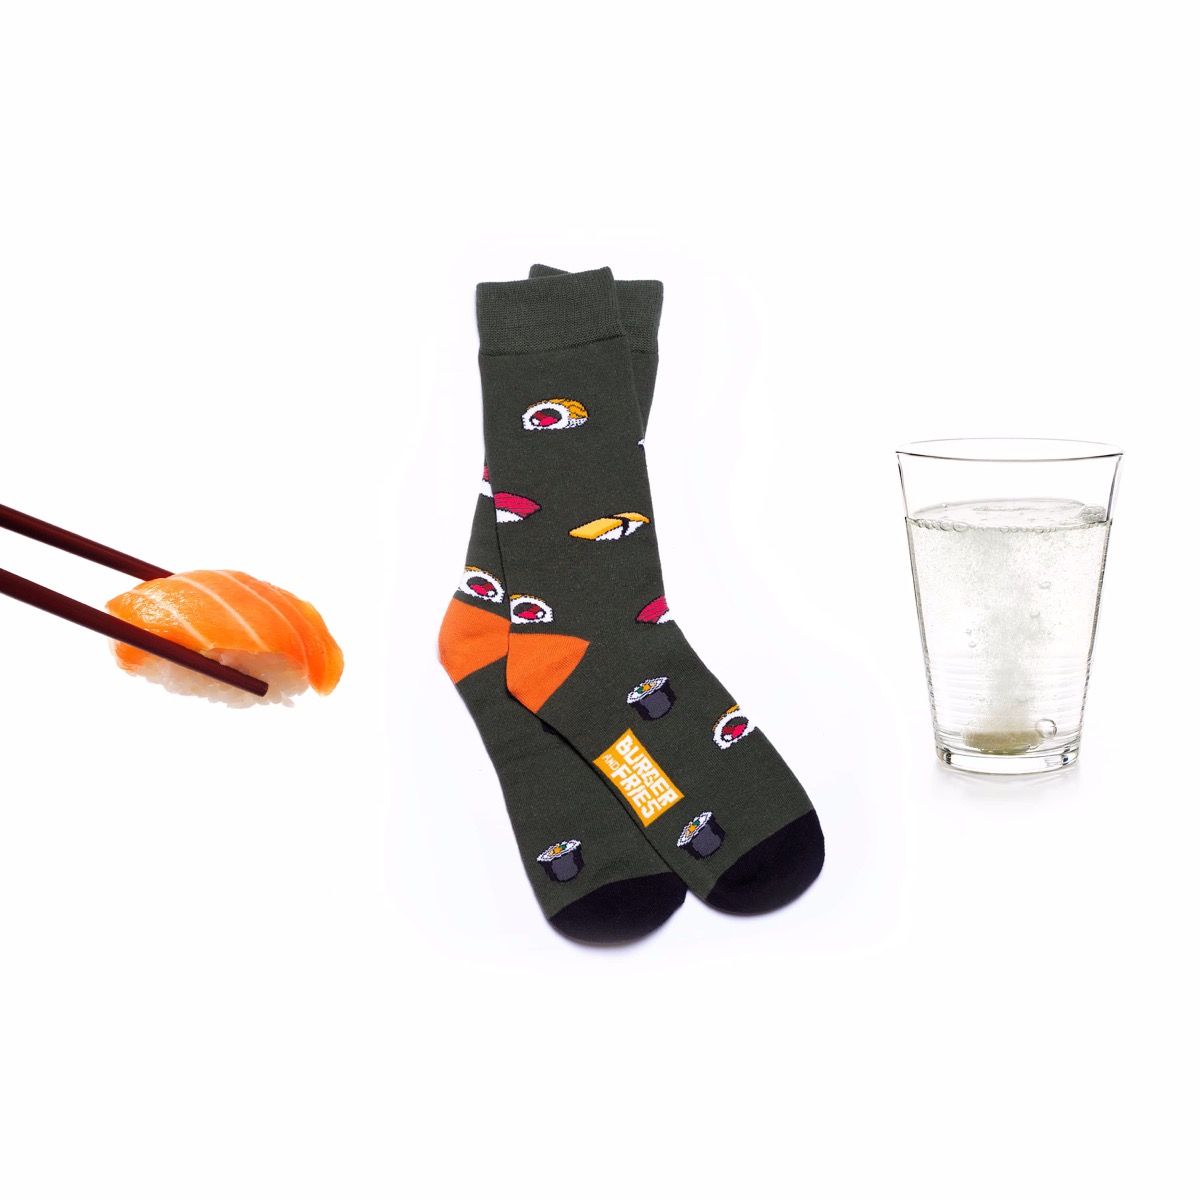 COUNTRY SOCKS SUSHI TIME